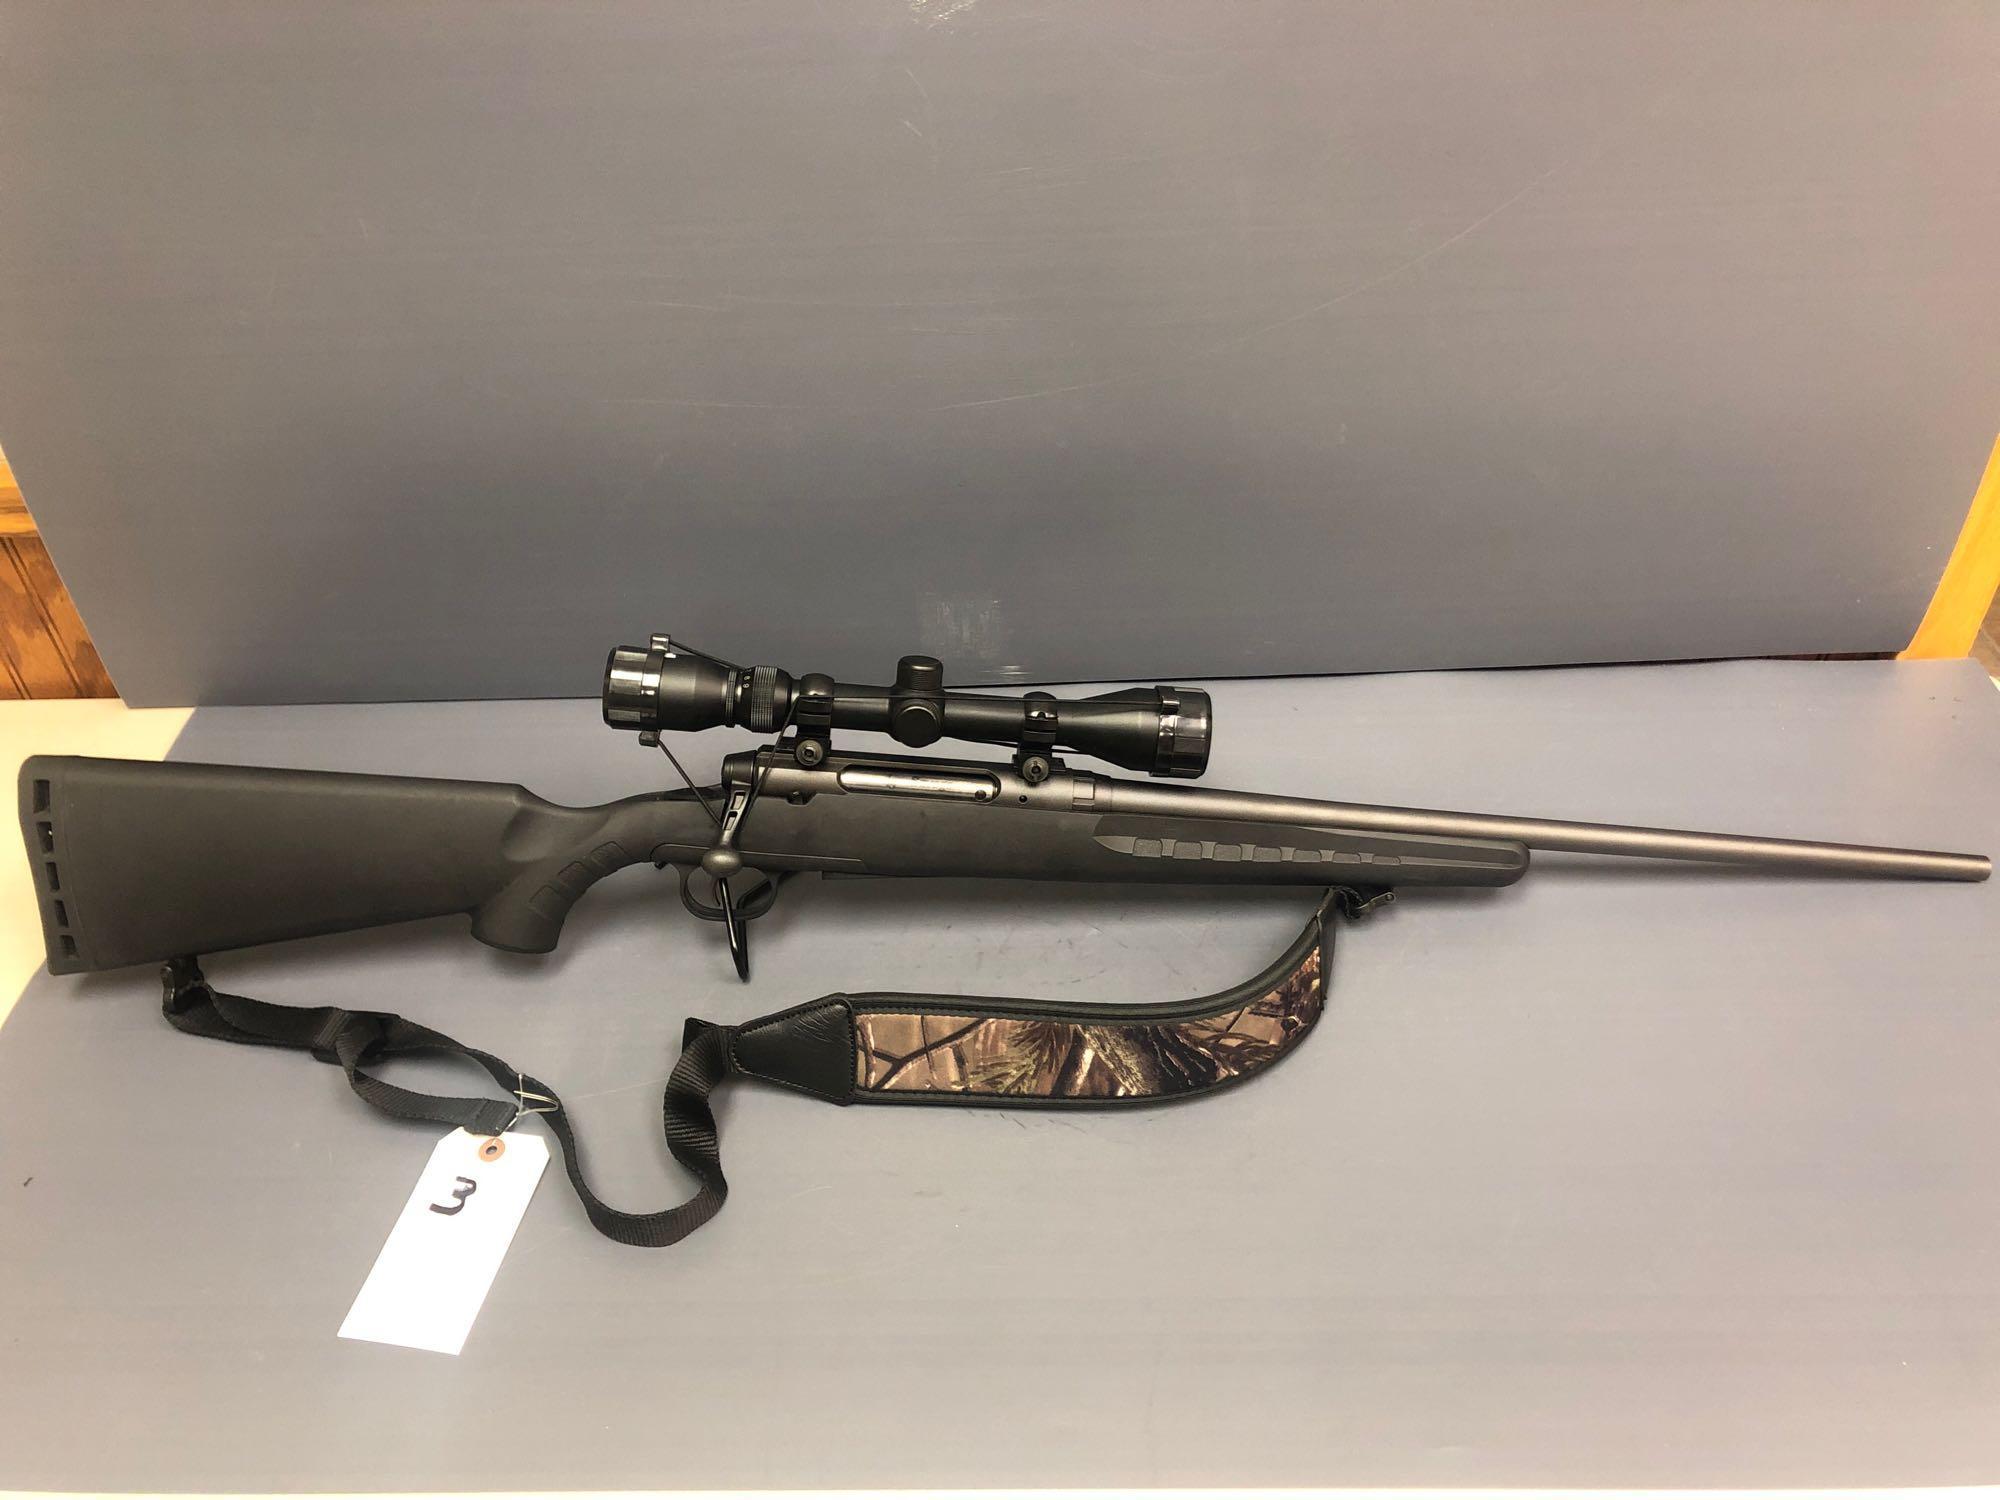 Savage Axis 30-06 cal. gun with clip & Bushnell scope. Incl. cloth case. Gun SN: H188453 - Like New!